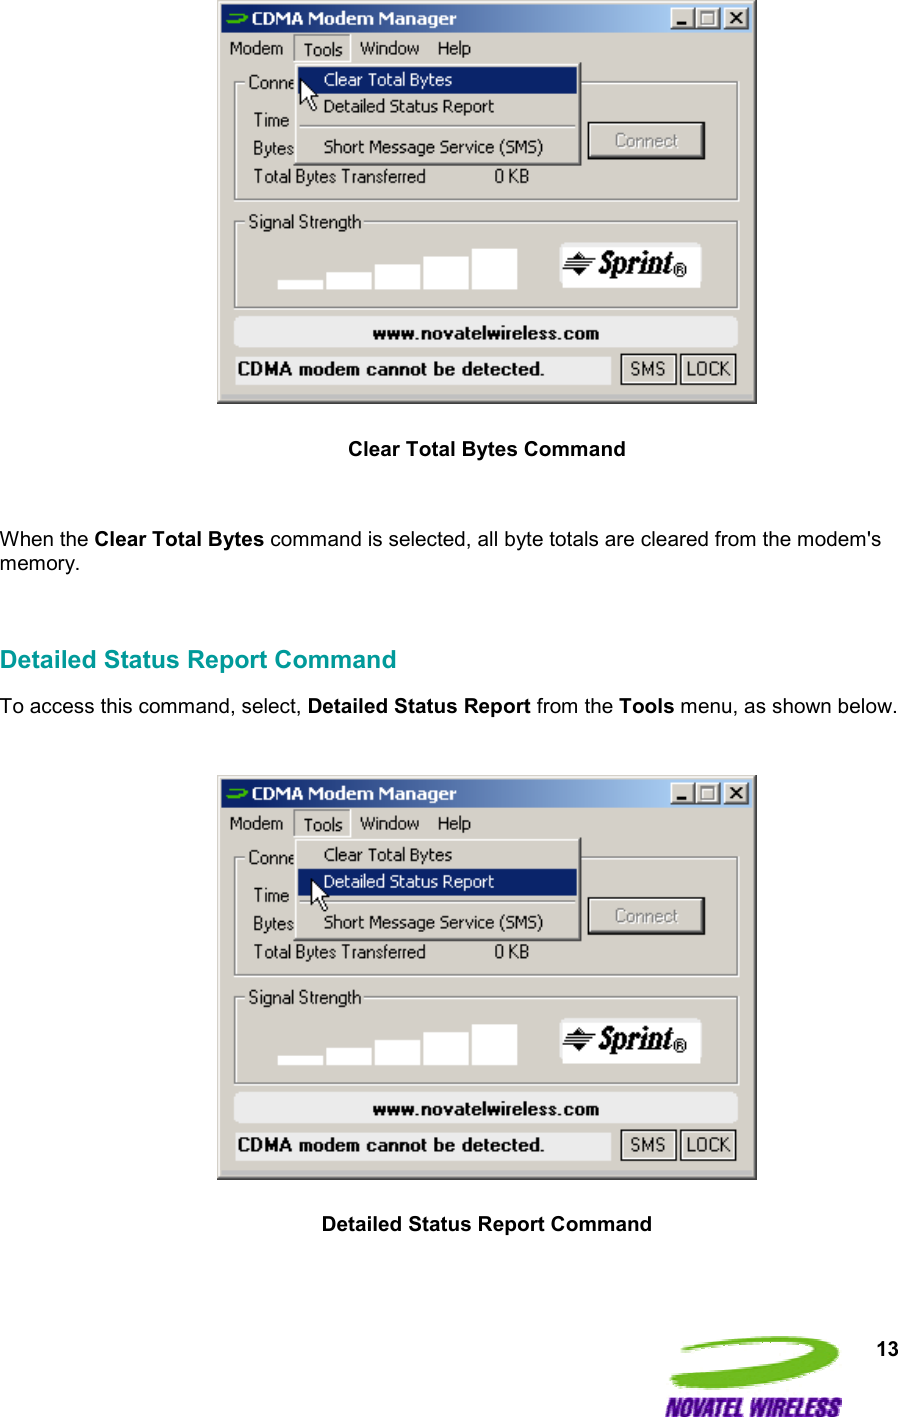  13   Clear Total Bytes Command  When the Clear Total Bytes command is selected, all byte totals are cleared from the modem&apos;s memory.  Detailed Status Report Command To access this command, select, Detailed Status Report from the Tools menu, as shown below.    Detailed Status Report Command  